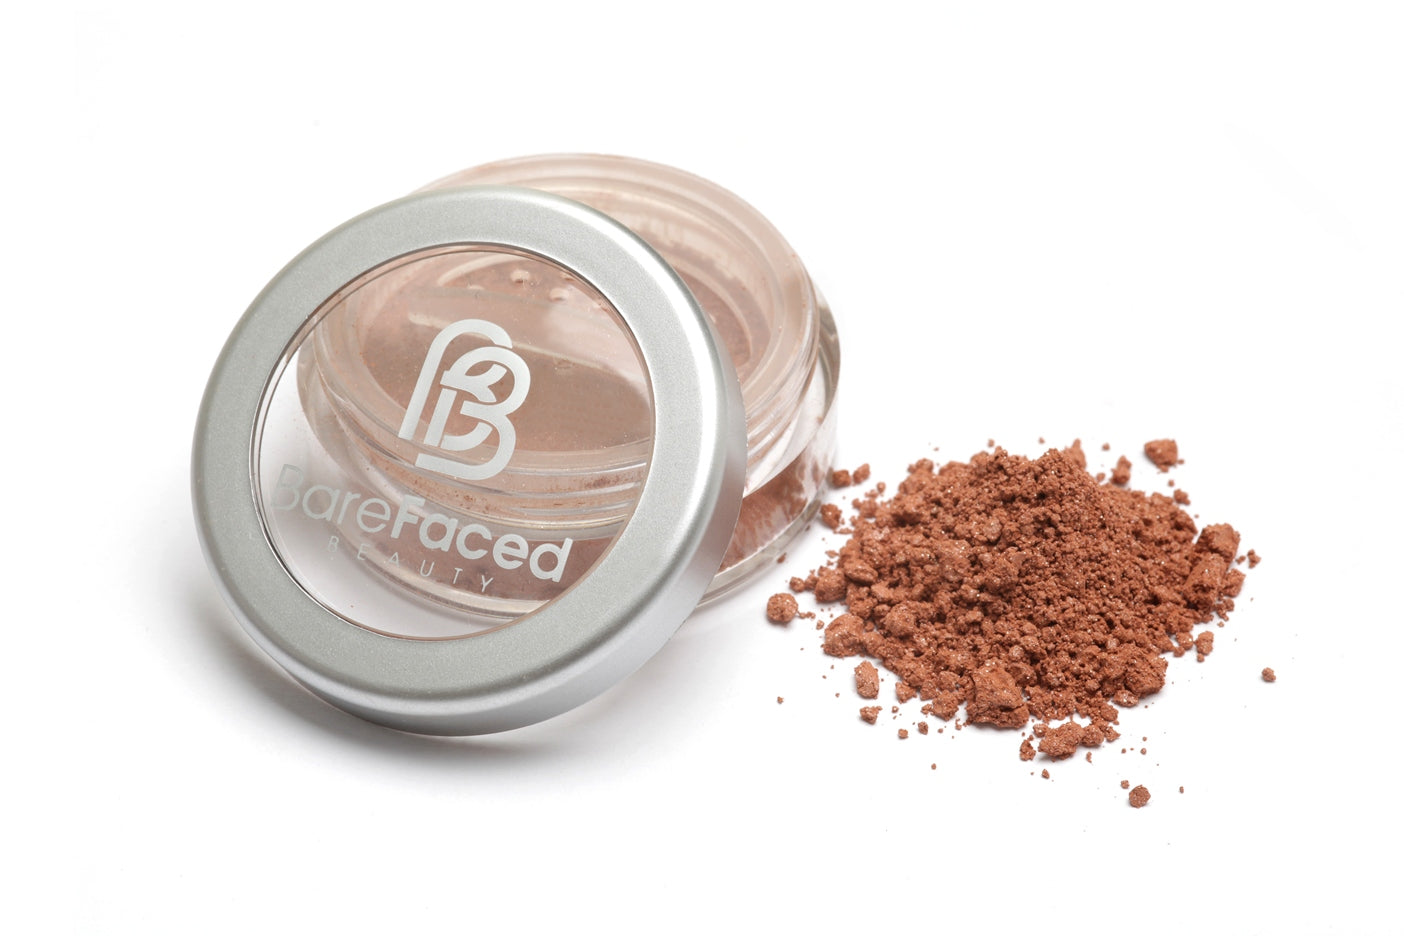 A small round pot of mineral bronzer, with a swatch of the powder next to it showing a warm/medium shade of bronzer -  for all skin types